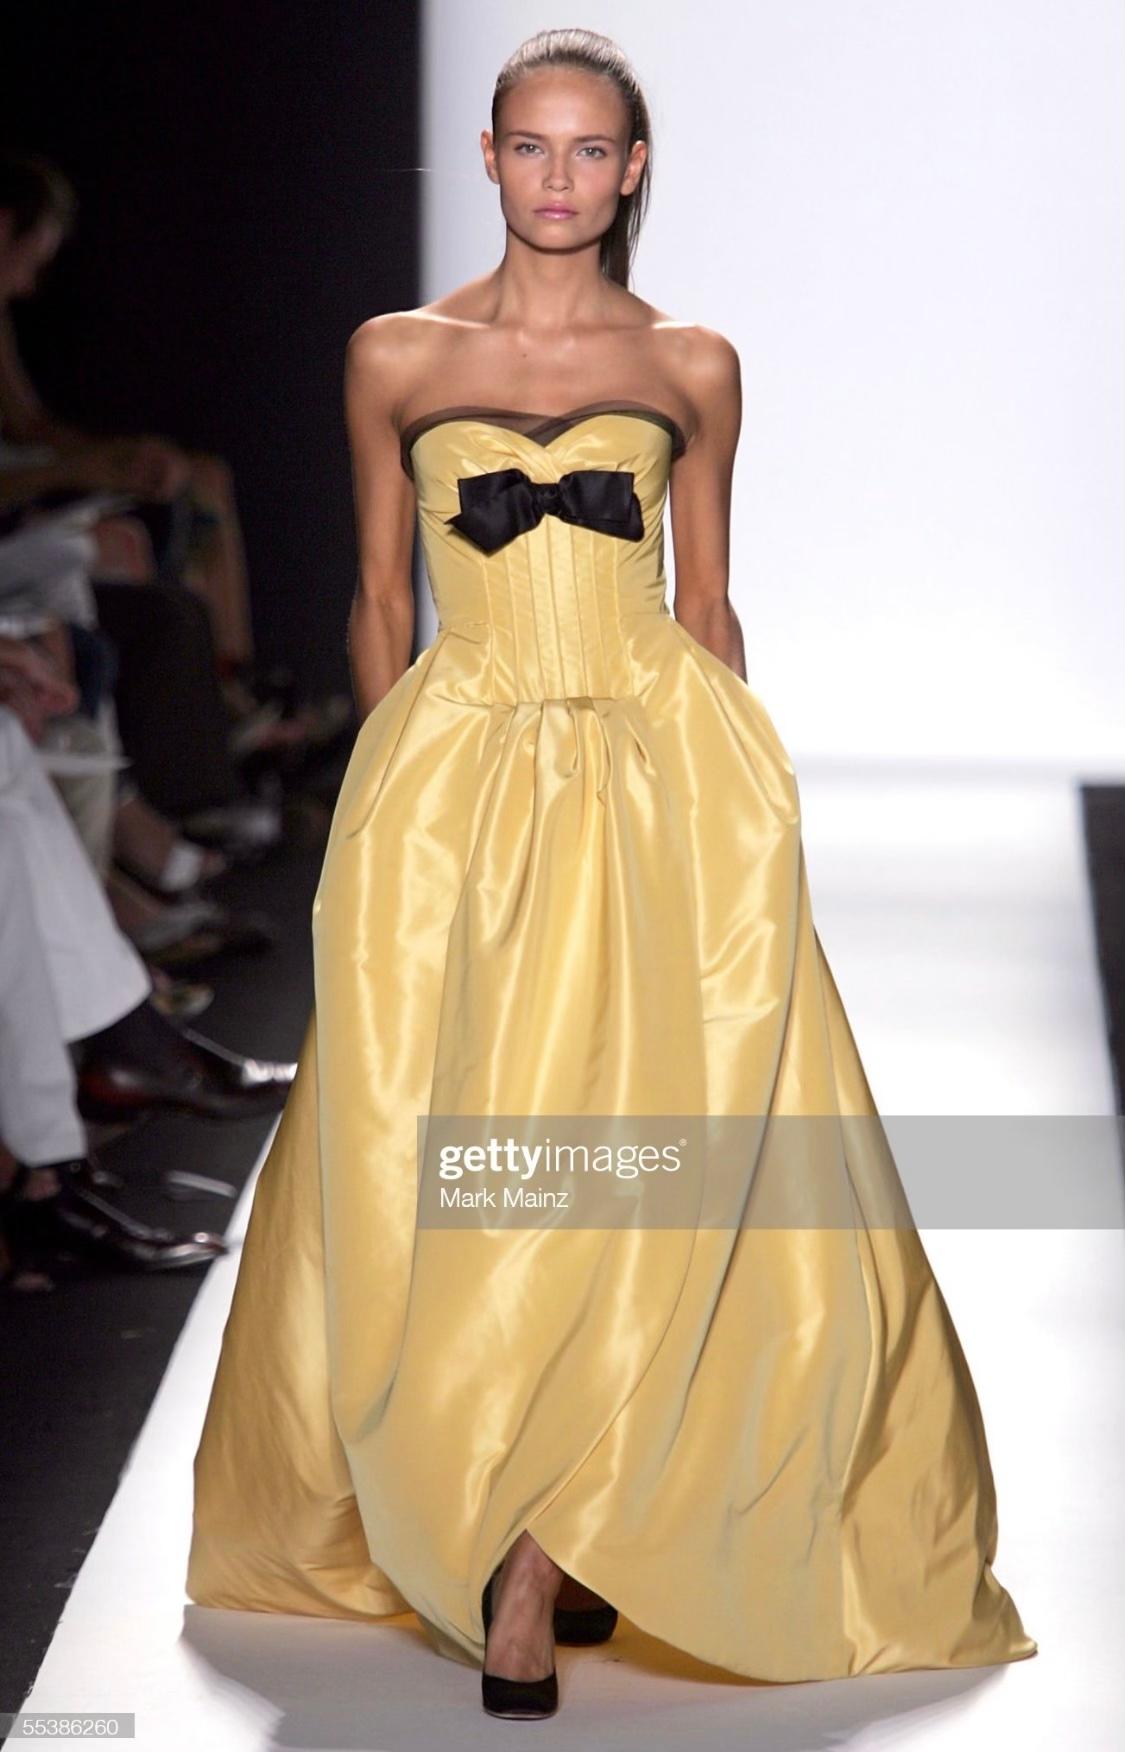 TheRealList presents: a stunning yellow silk taffeta Oscar de la Renta gown. From the Spring/Summer 2006 collection, this dress debuted on the season's runway as look 70 on Natasha Poly. This fabulous strapless gown features an internal boned